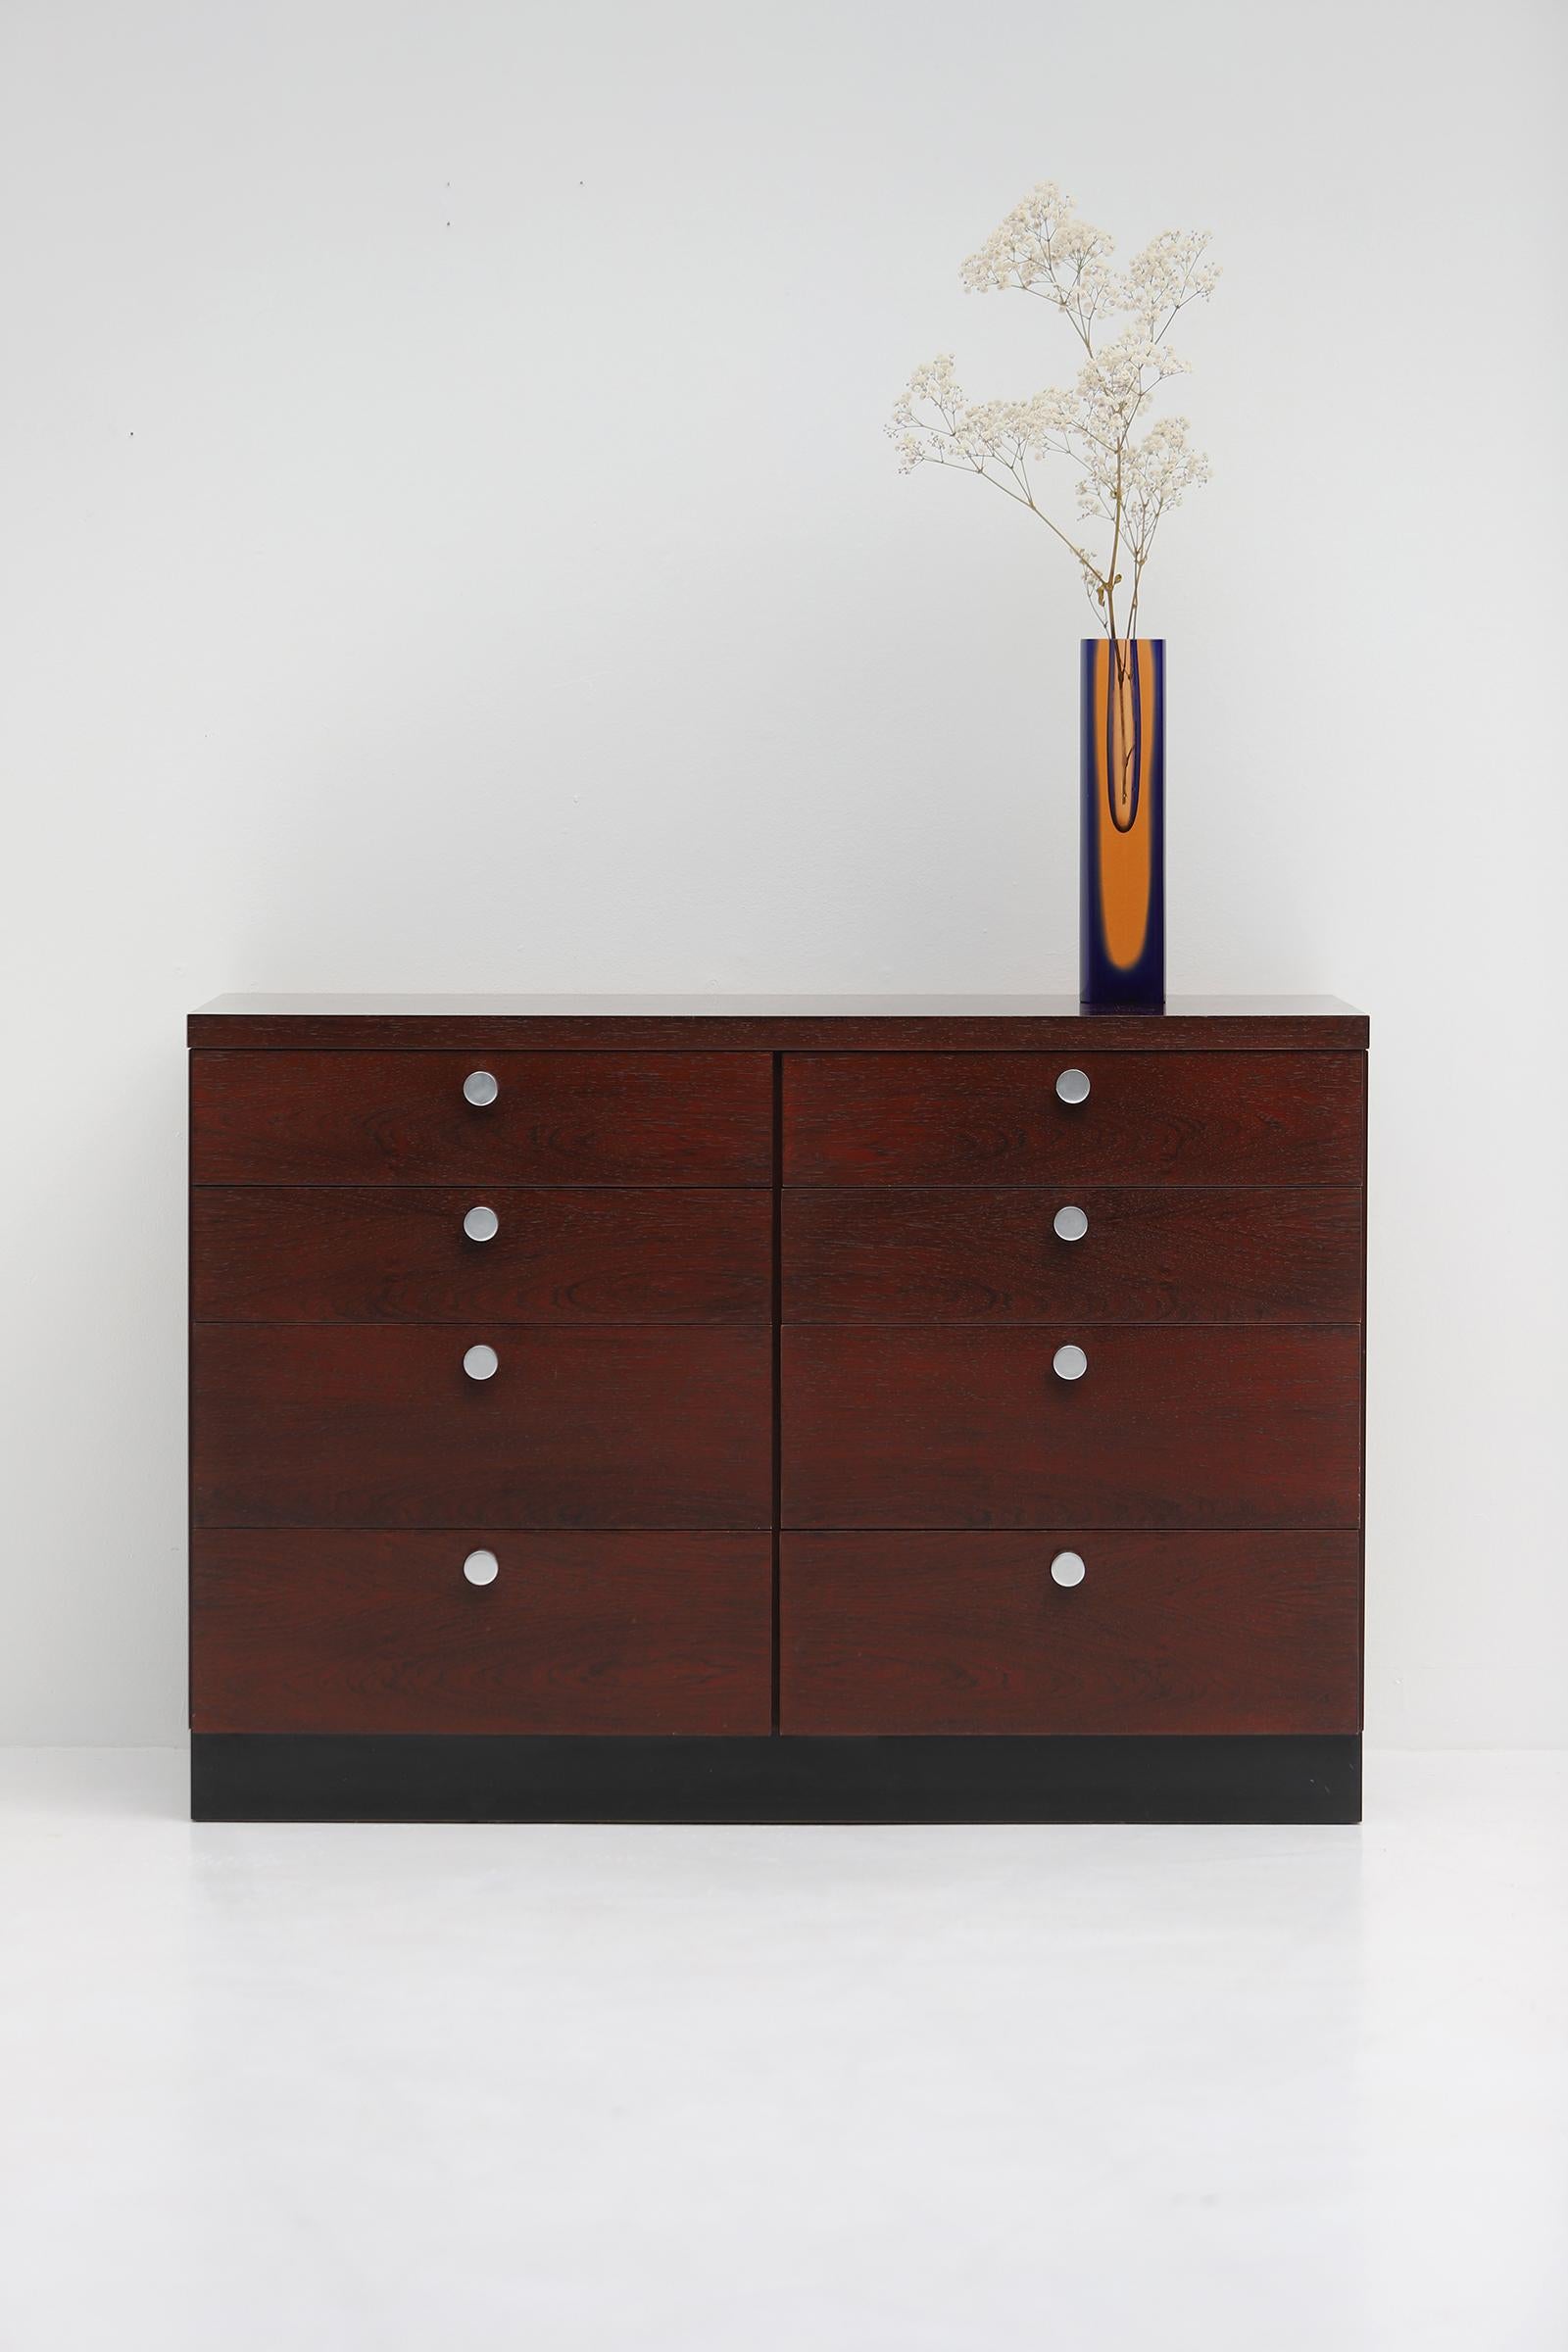 mind-century commode with drawers by Alfred Hendrickx 1970s For Sale 4